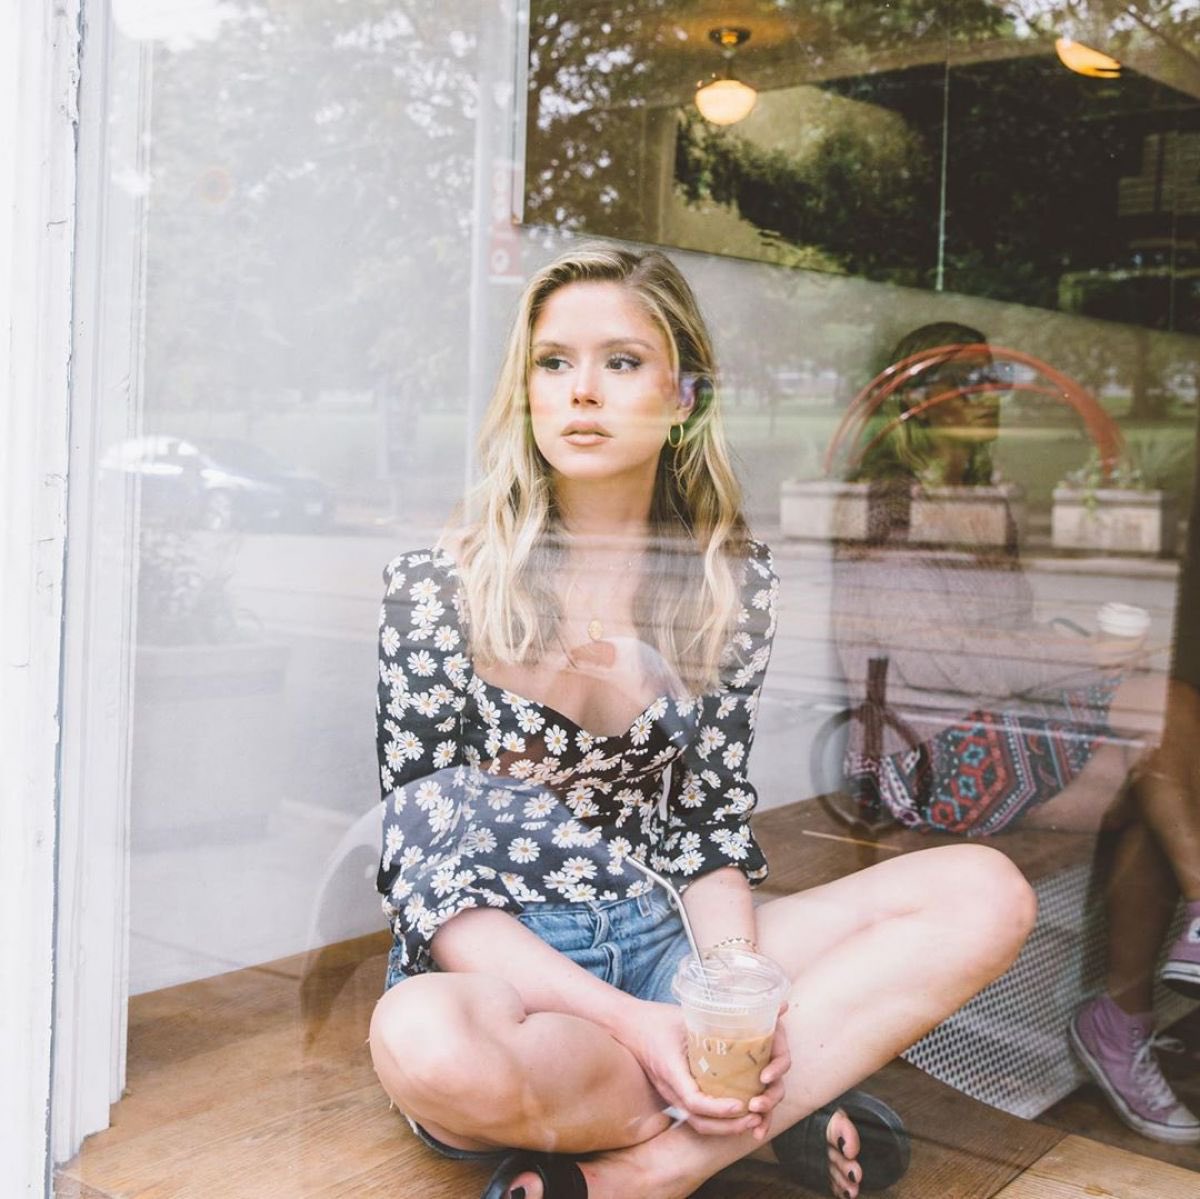 erin moriarty for coveteur magazinepic.twitter.com/jbQwniusPH.